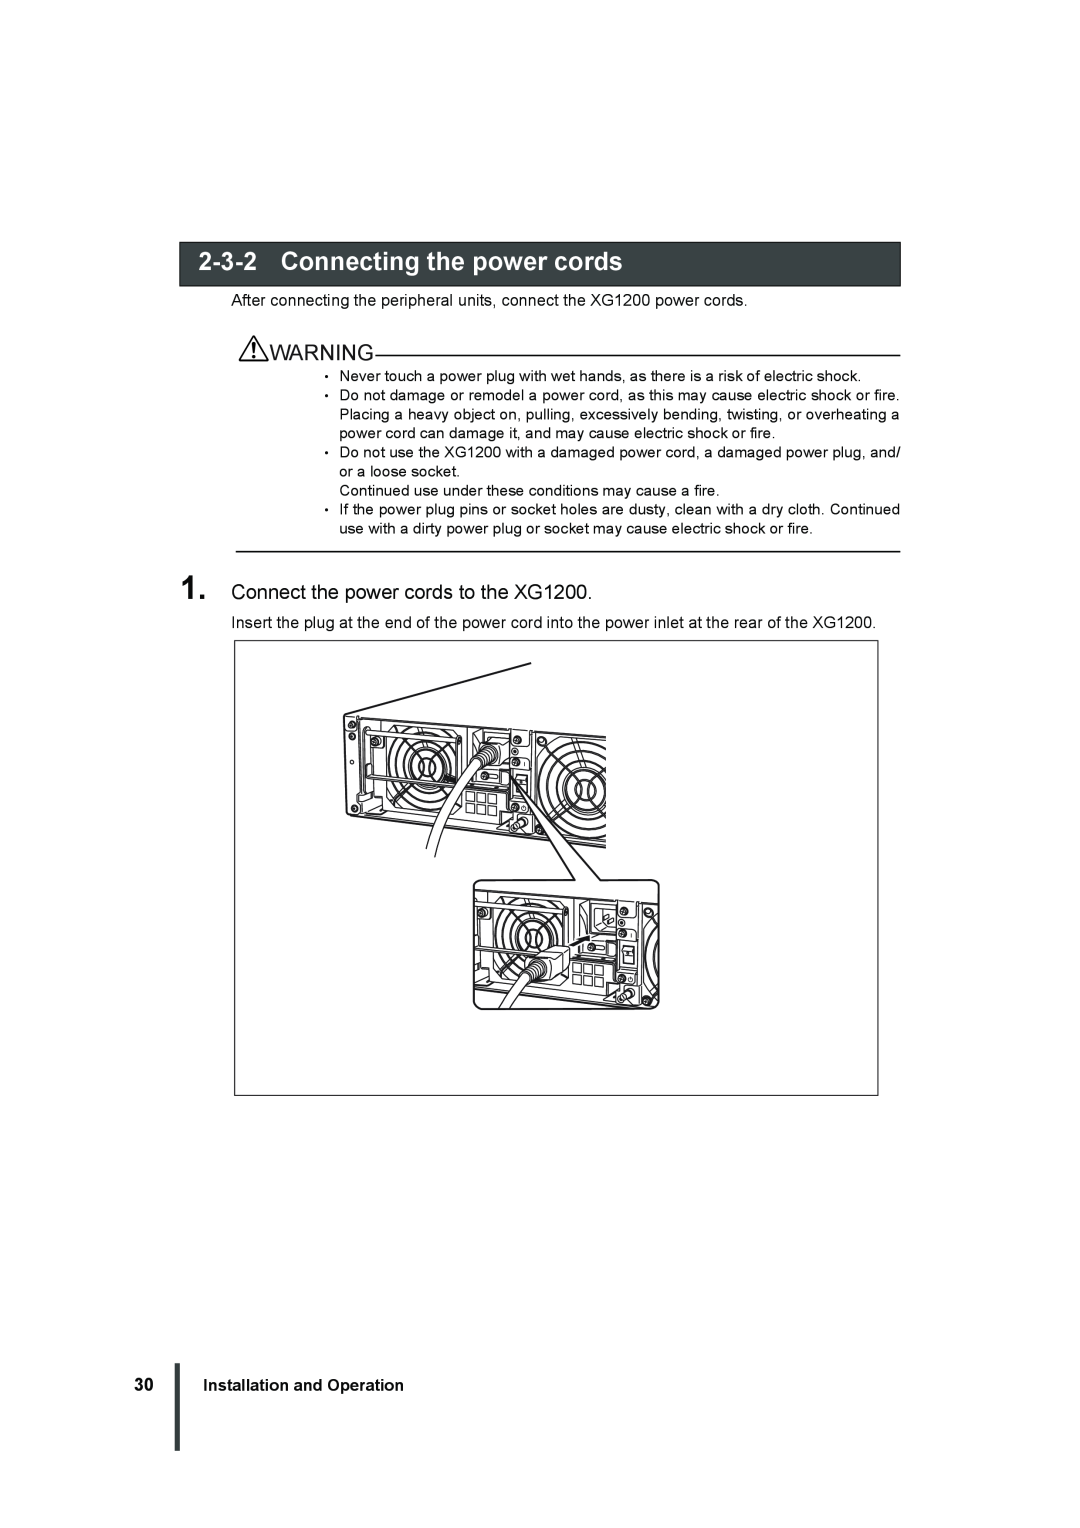 Fujitsu manual Connecting the power cords, Connect the power cords to the XG1200, Installation and Operation 